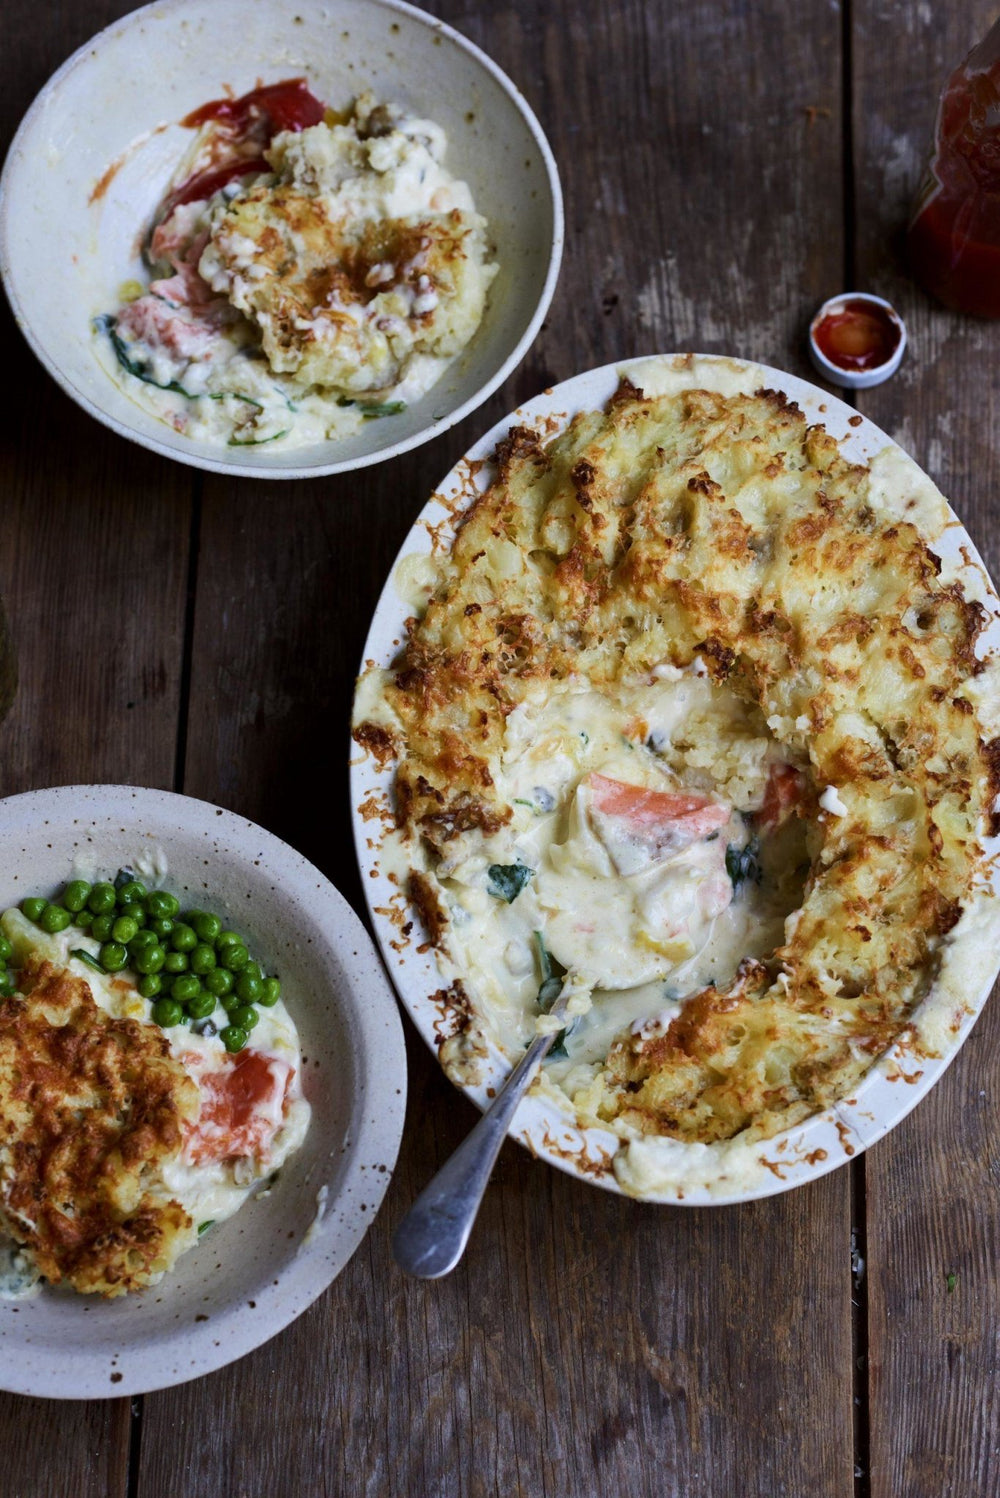 Sustainable Fish Pie For One - FieldGoods